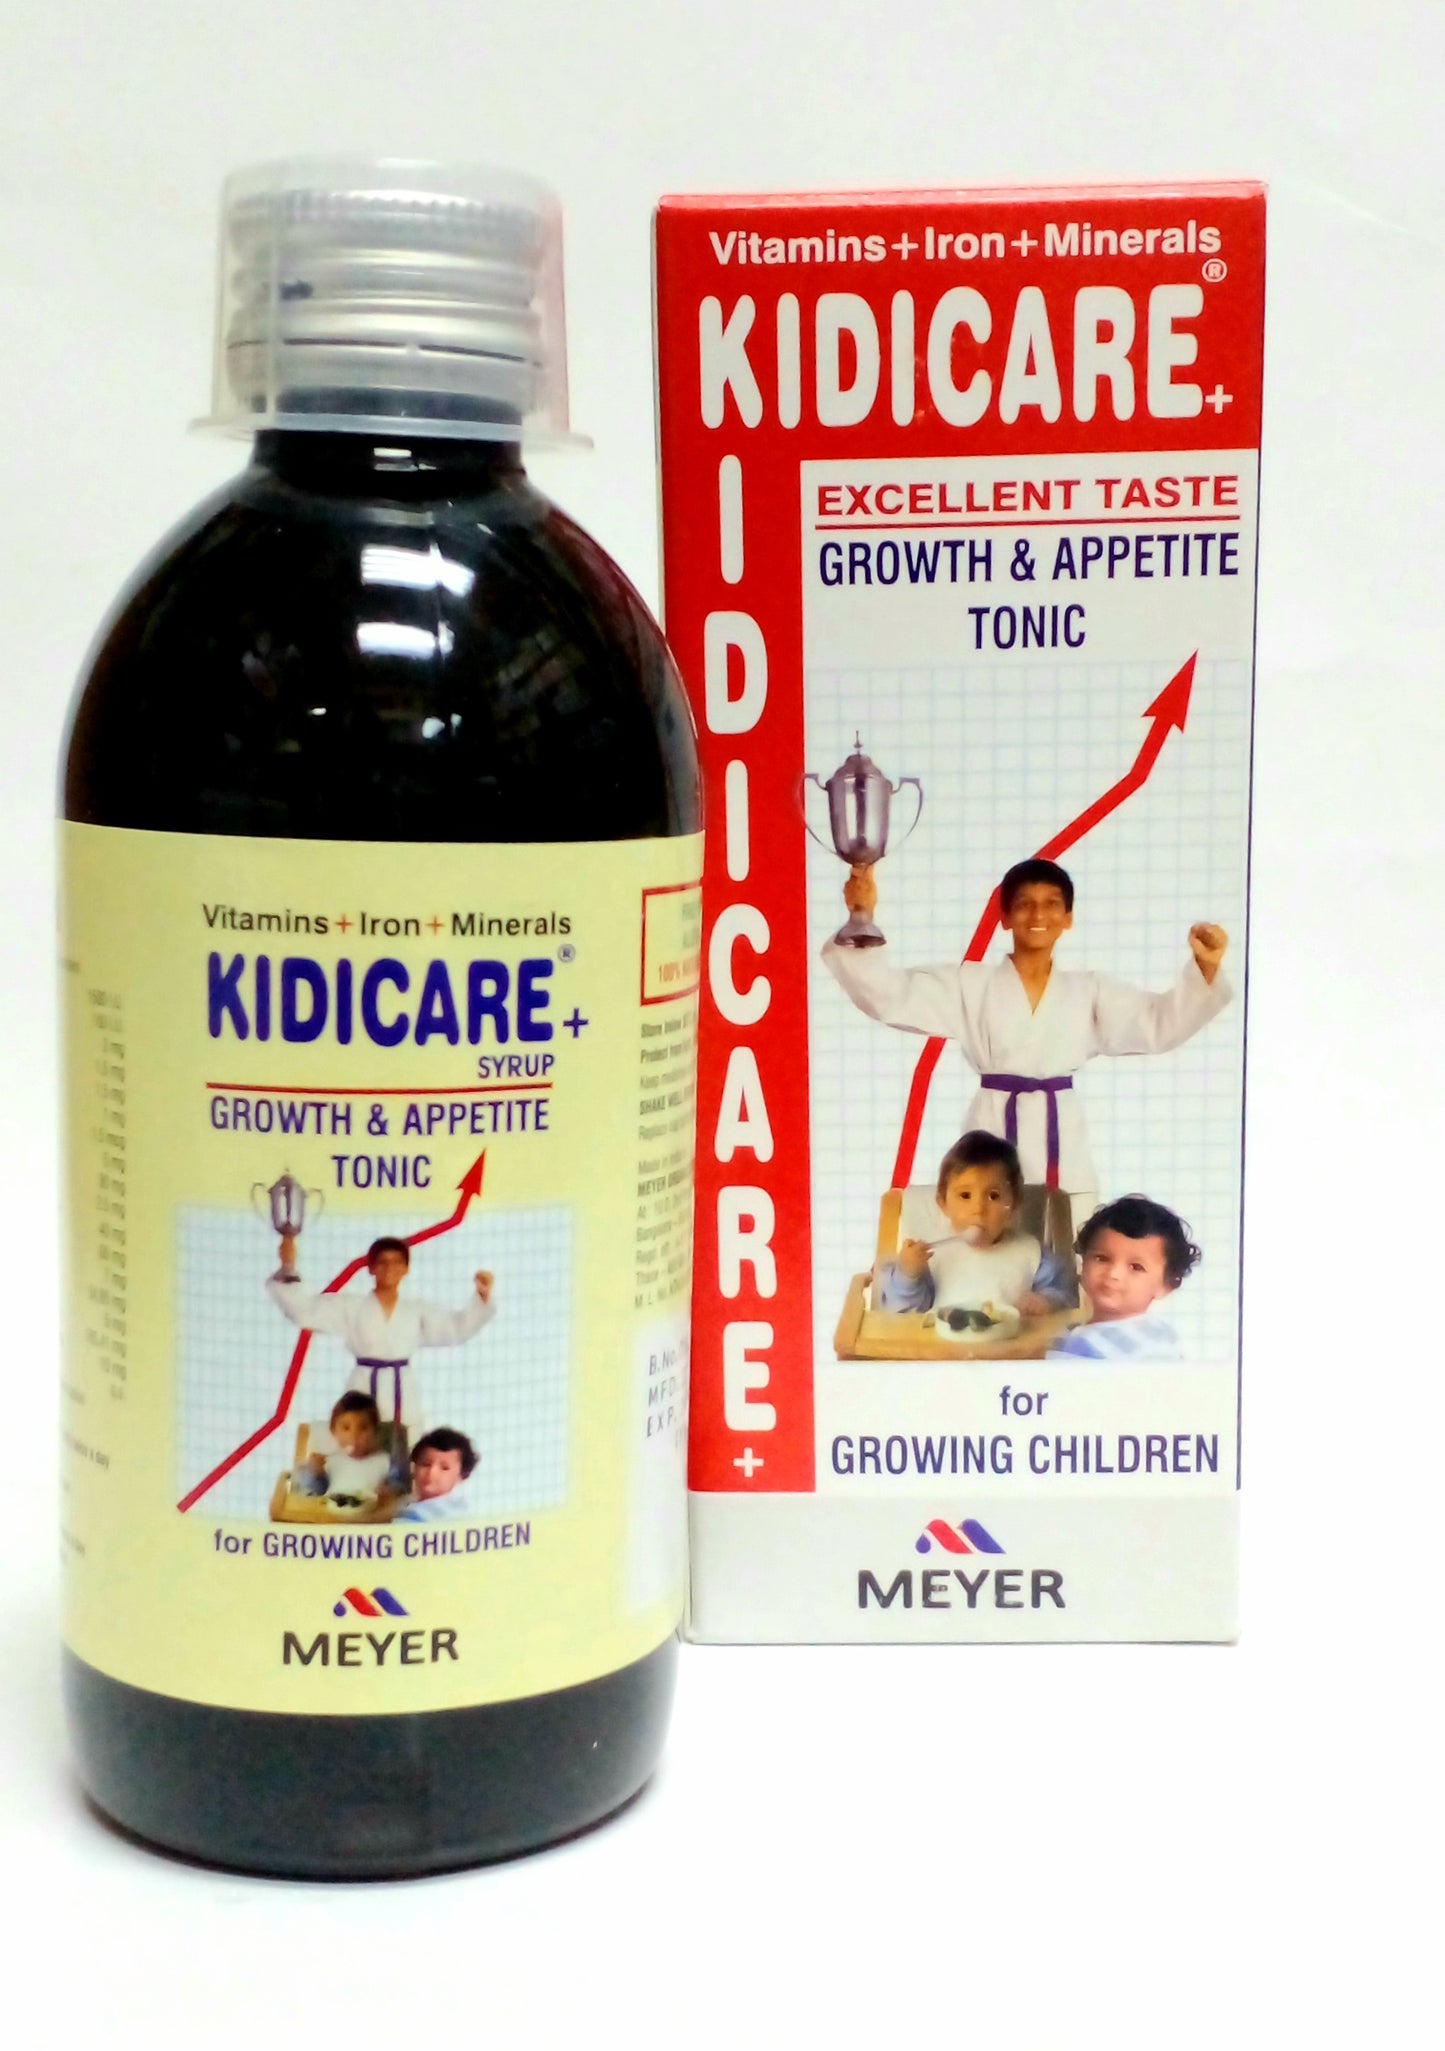 Kidcare Growth & Appetite Tonic